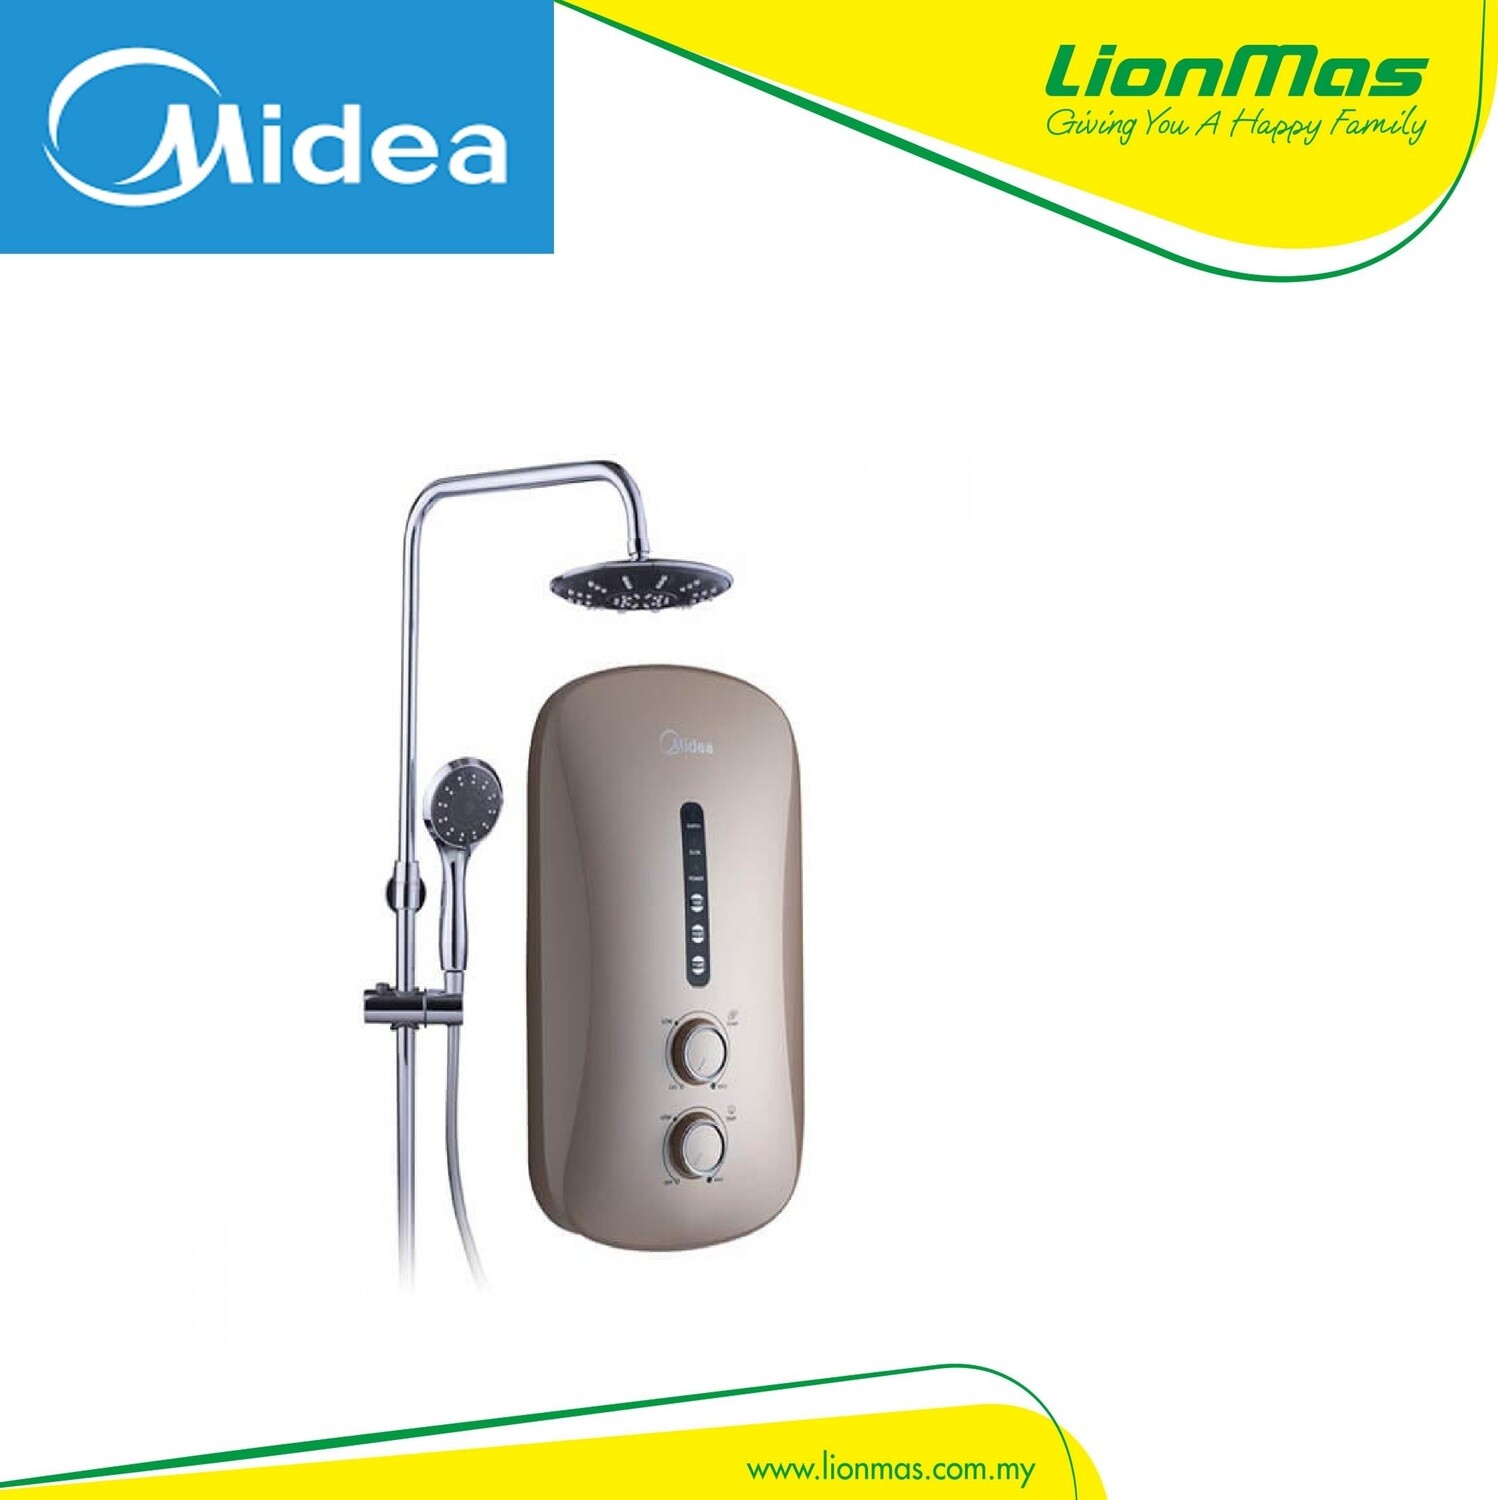 MIDEA WATER HEATER WITH PUMP & RAIN SHOWER MWH-38P3RS